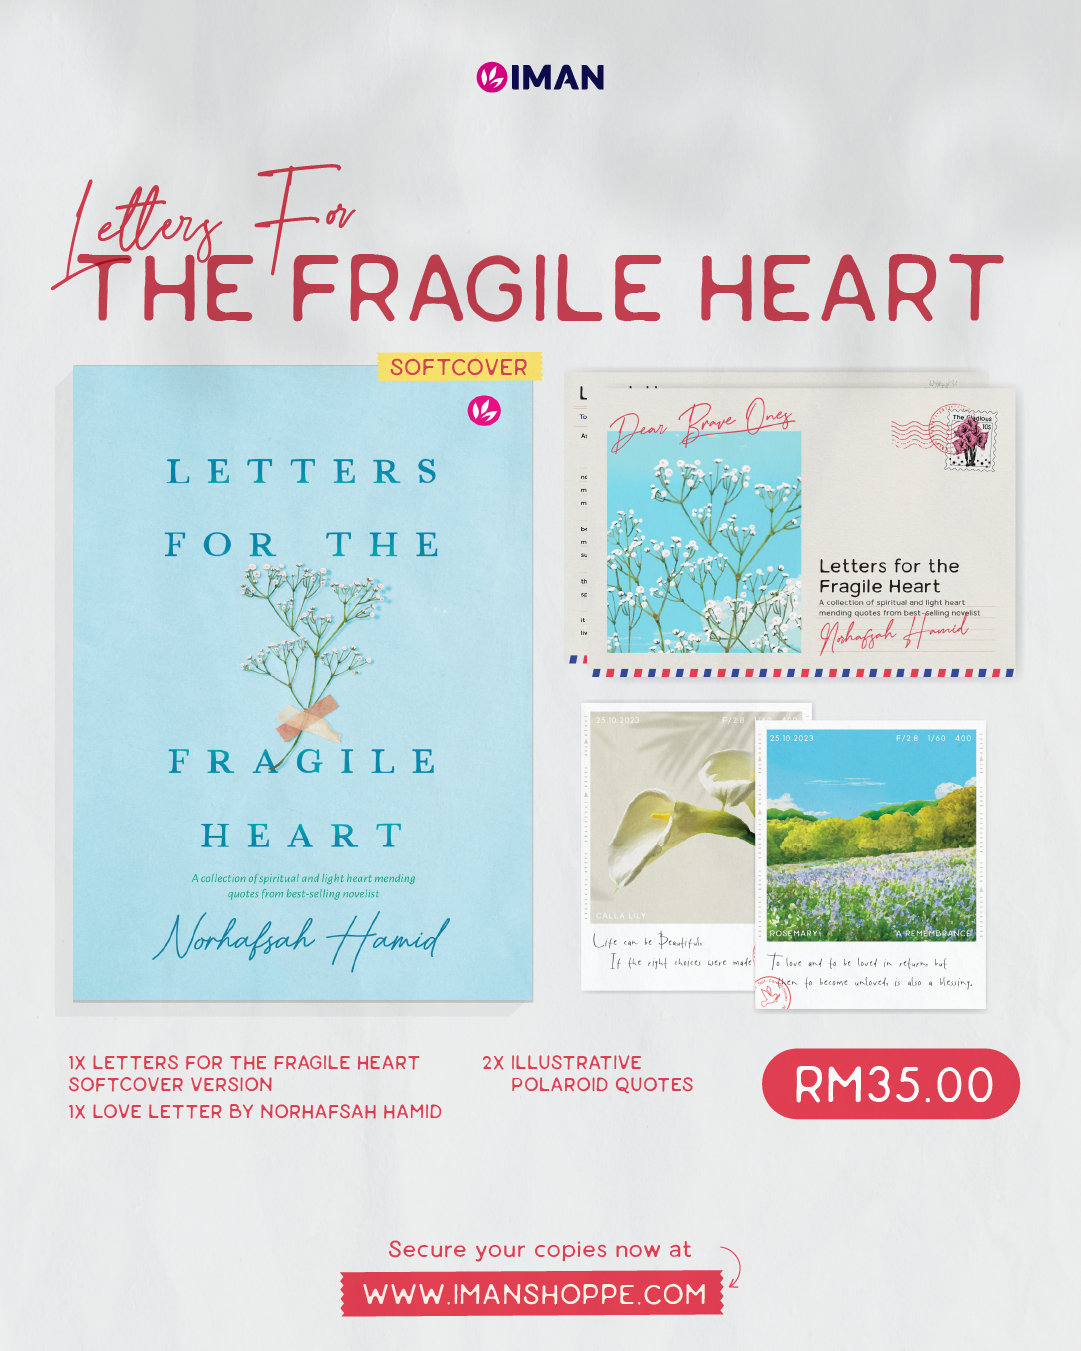 Iman Publication Book Letters For the Fragile Heart  (Softcover) by Norhafsah Hamid 201604